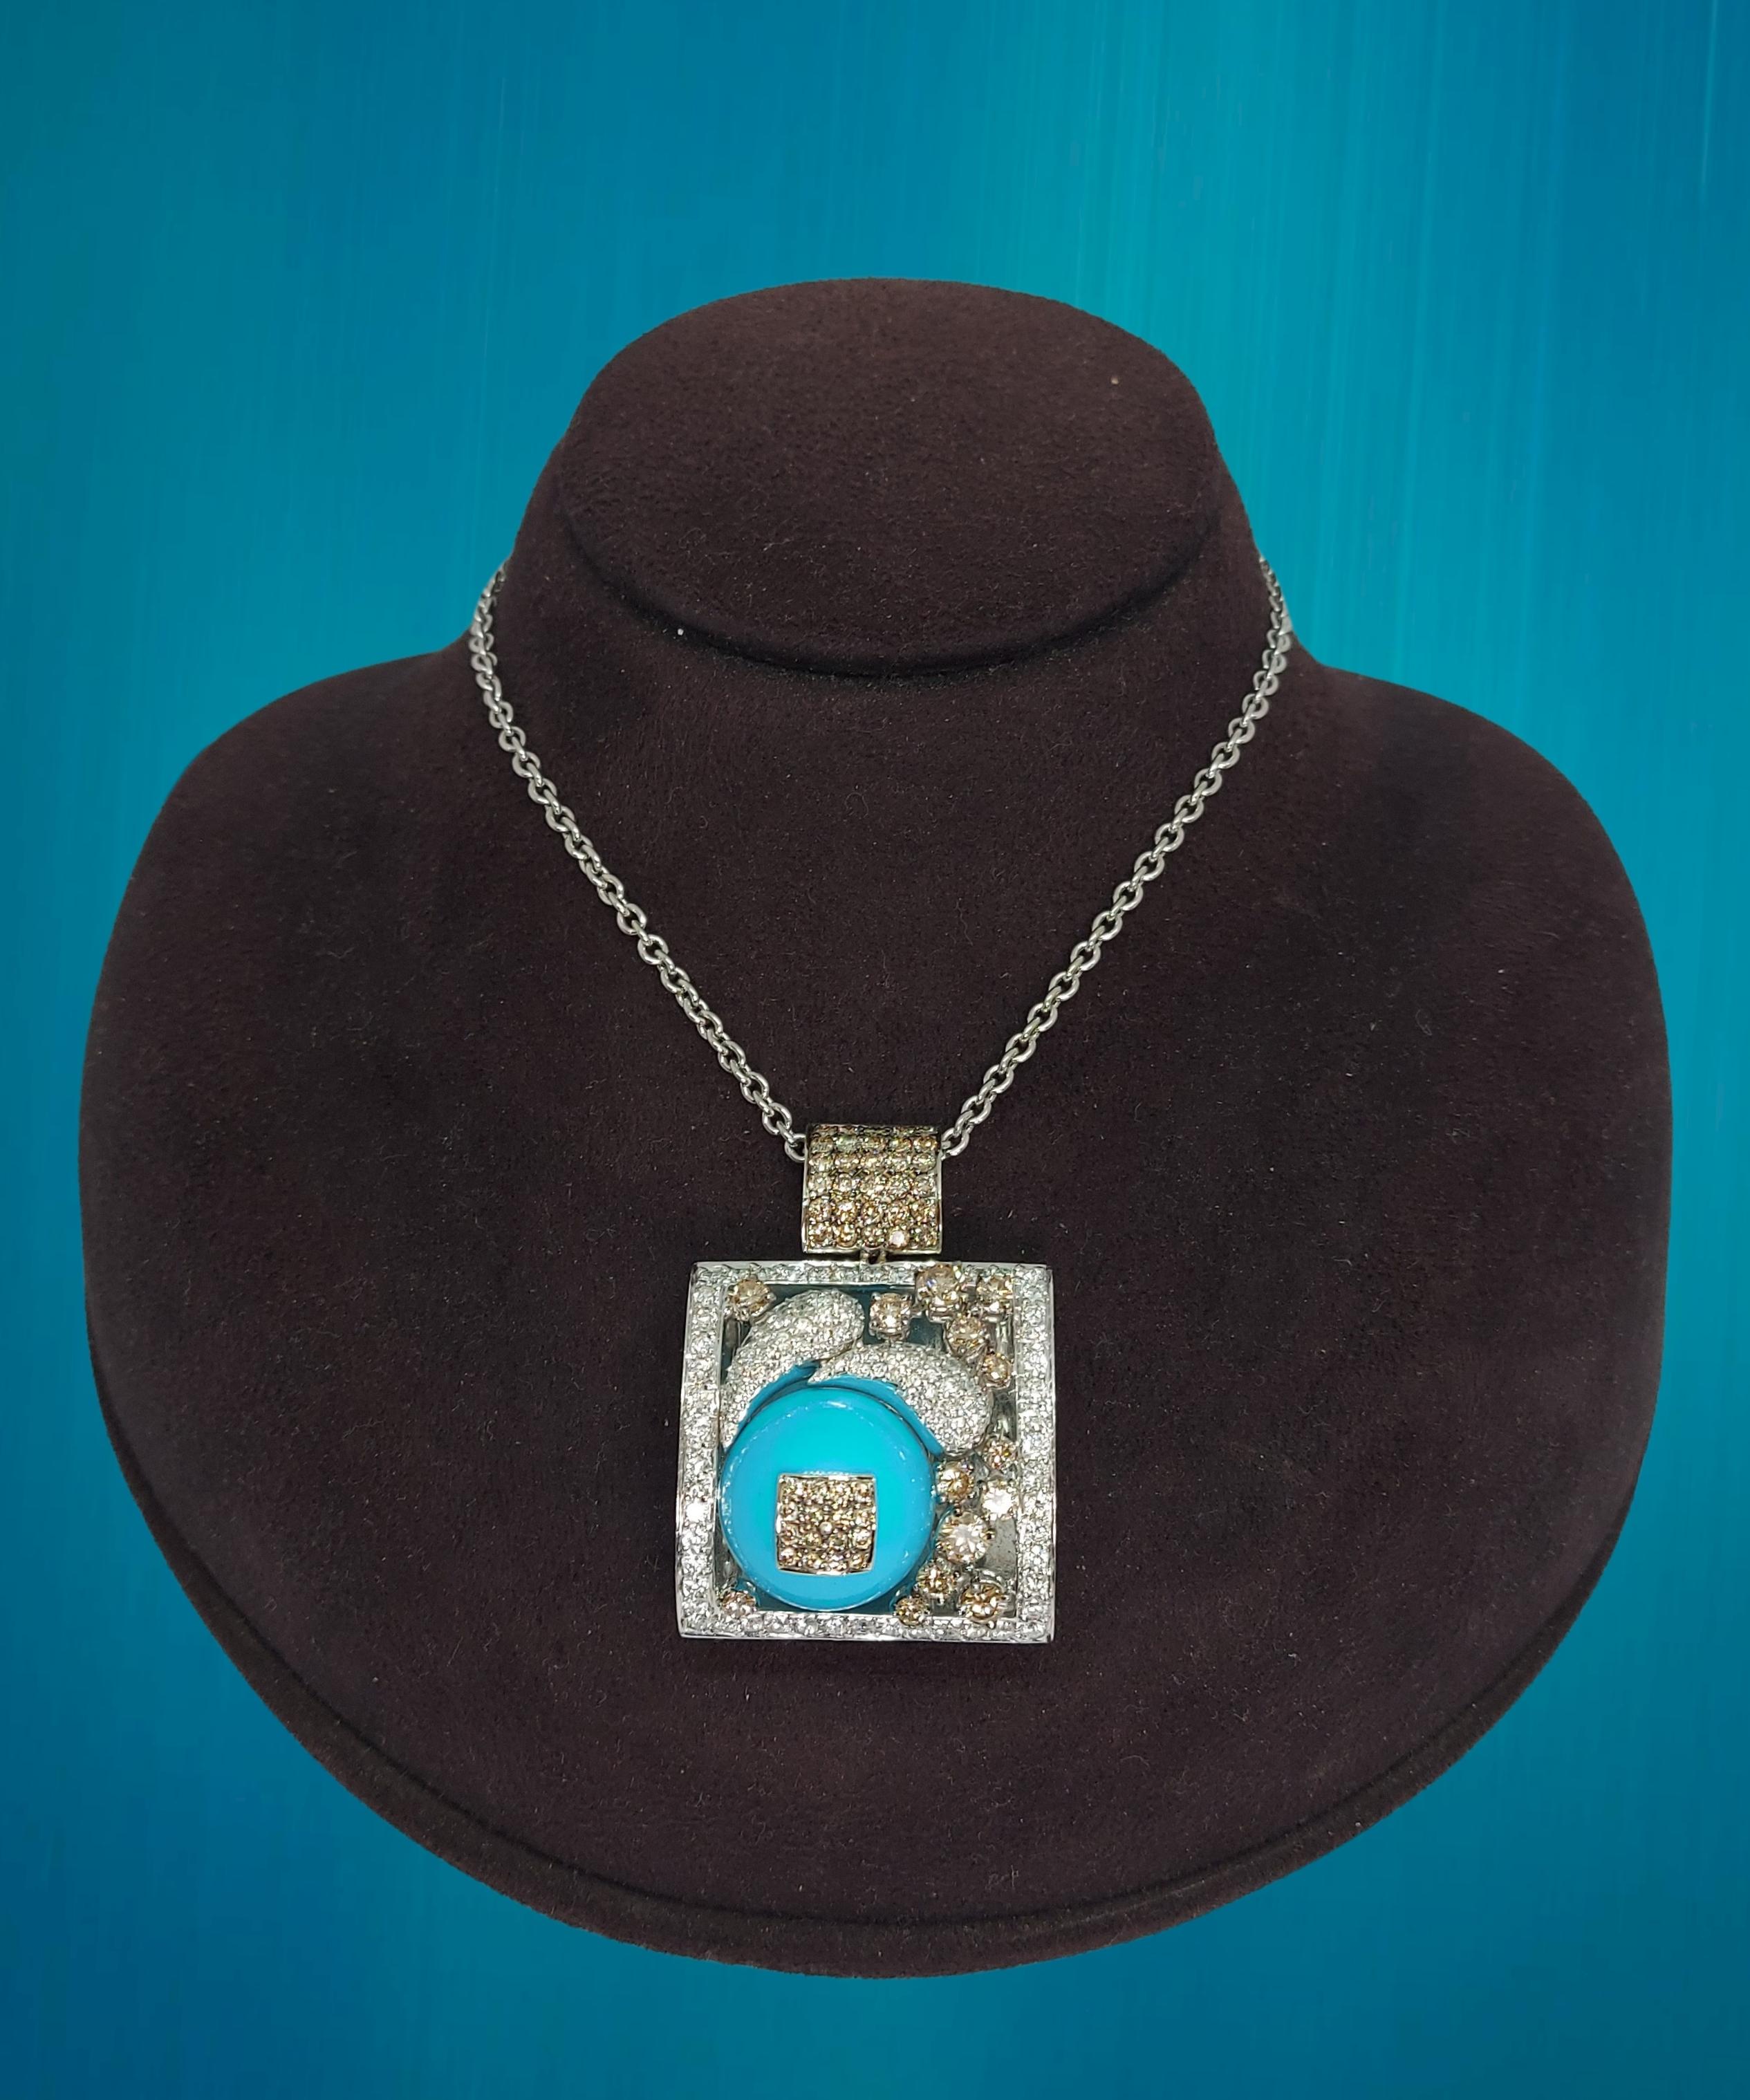 Rare and Beautiful 18kt White Gold Pendant / Necklace with Turquoise and Diamonds

The necklace chain is 43cm long

Turquoise ball: diameter 20 mm

Brown diamonds: 59

White diamonds: 126

Material: 18kt White Gold

Total weight: 51.8 gram / 1.820